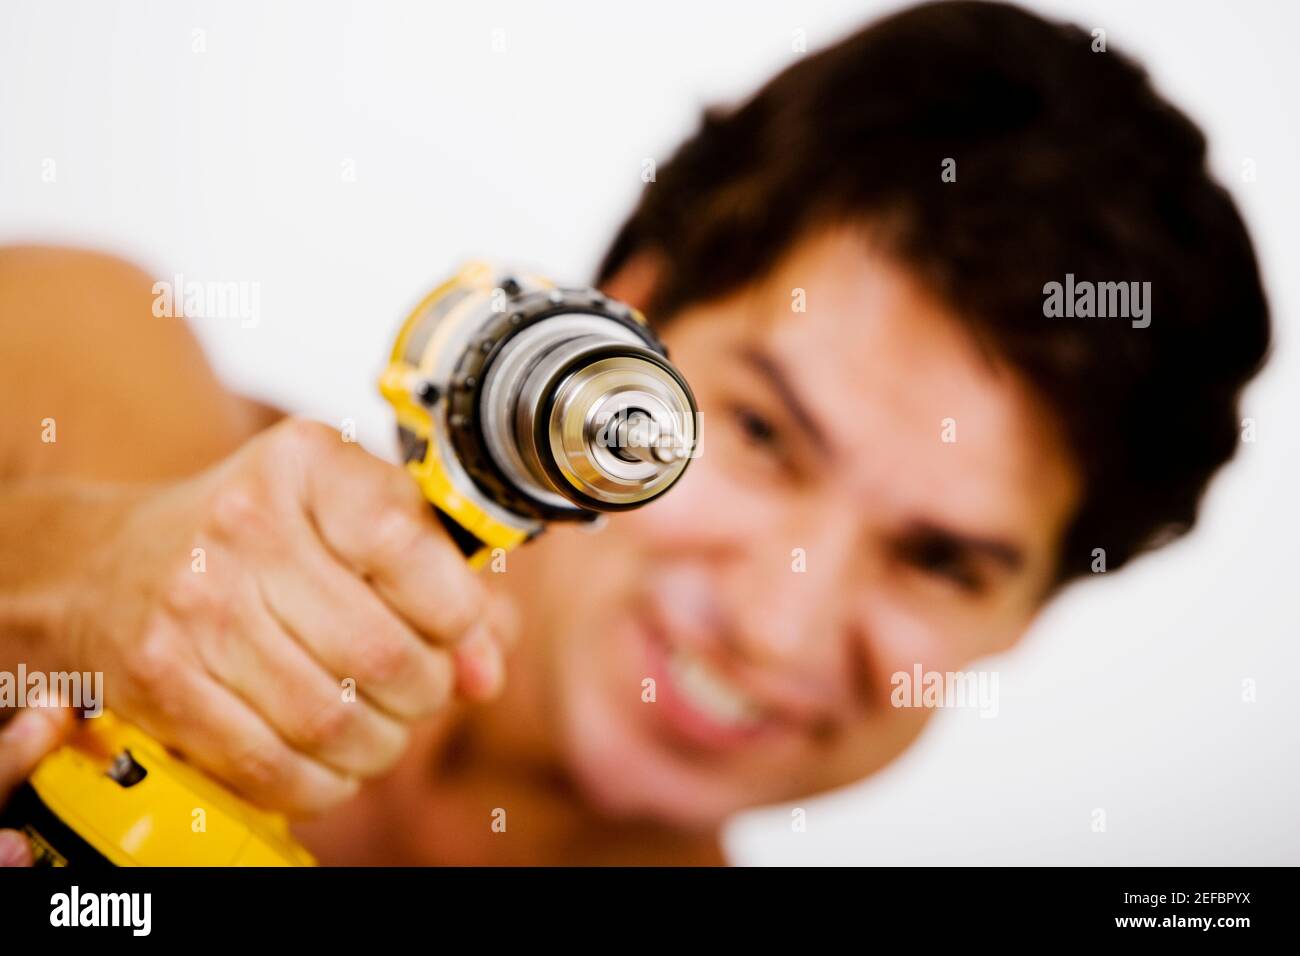 Portrait of a mid adult man holding a drill machine Stock Photo